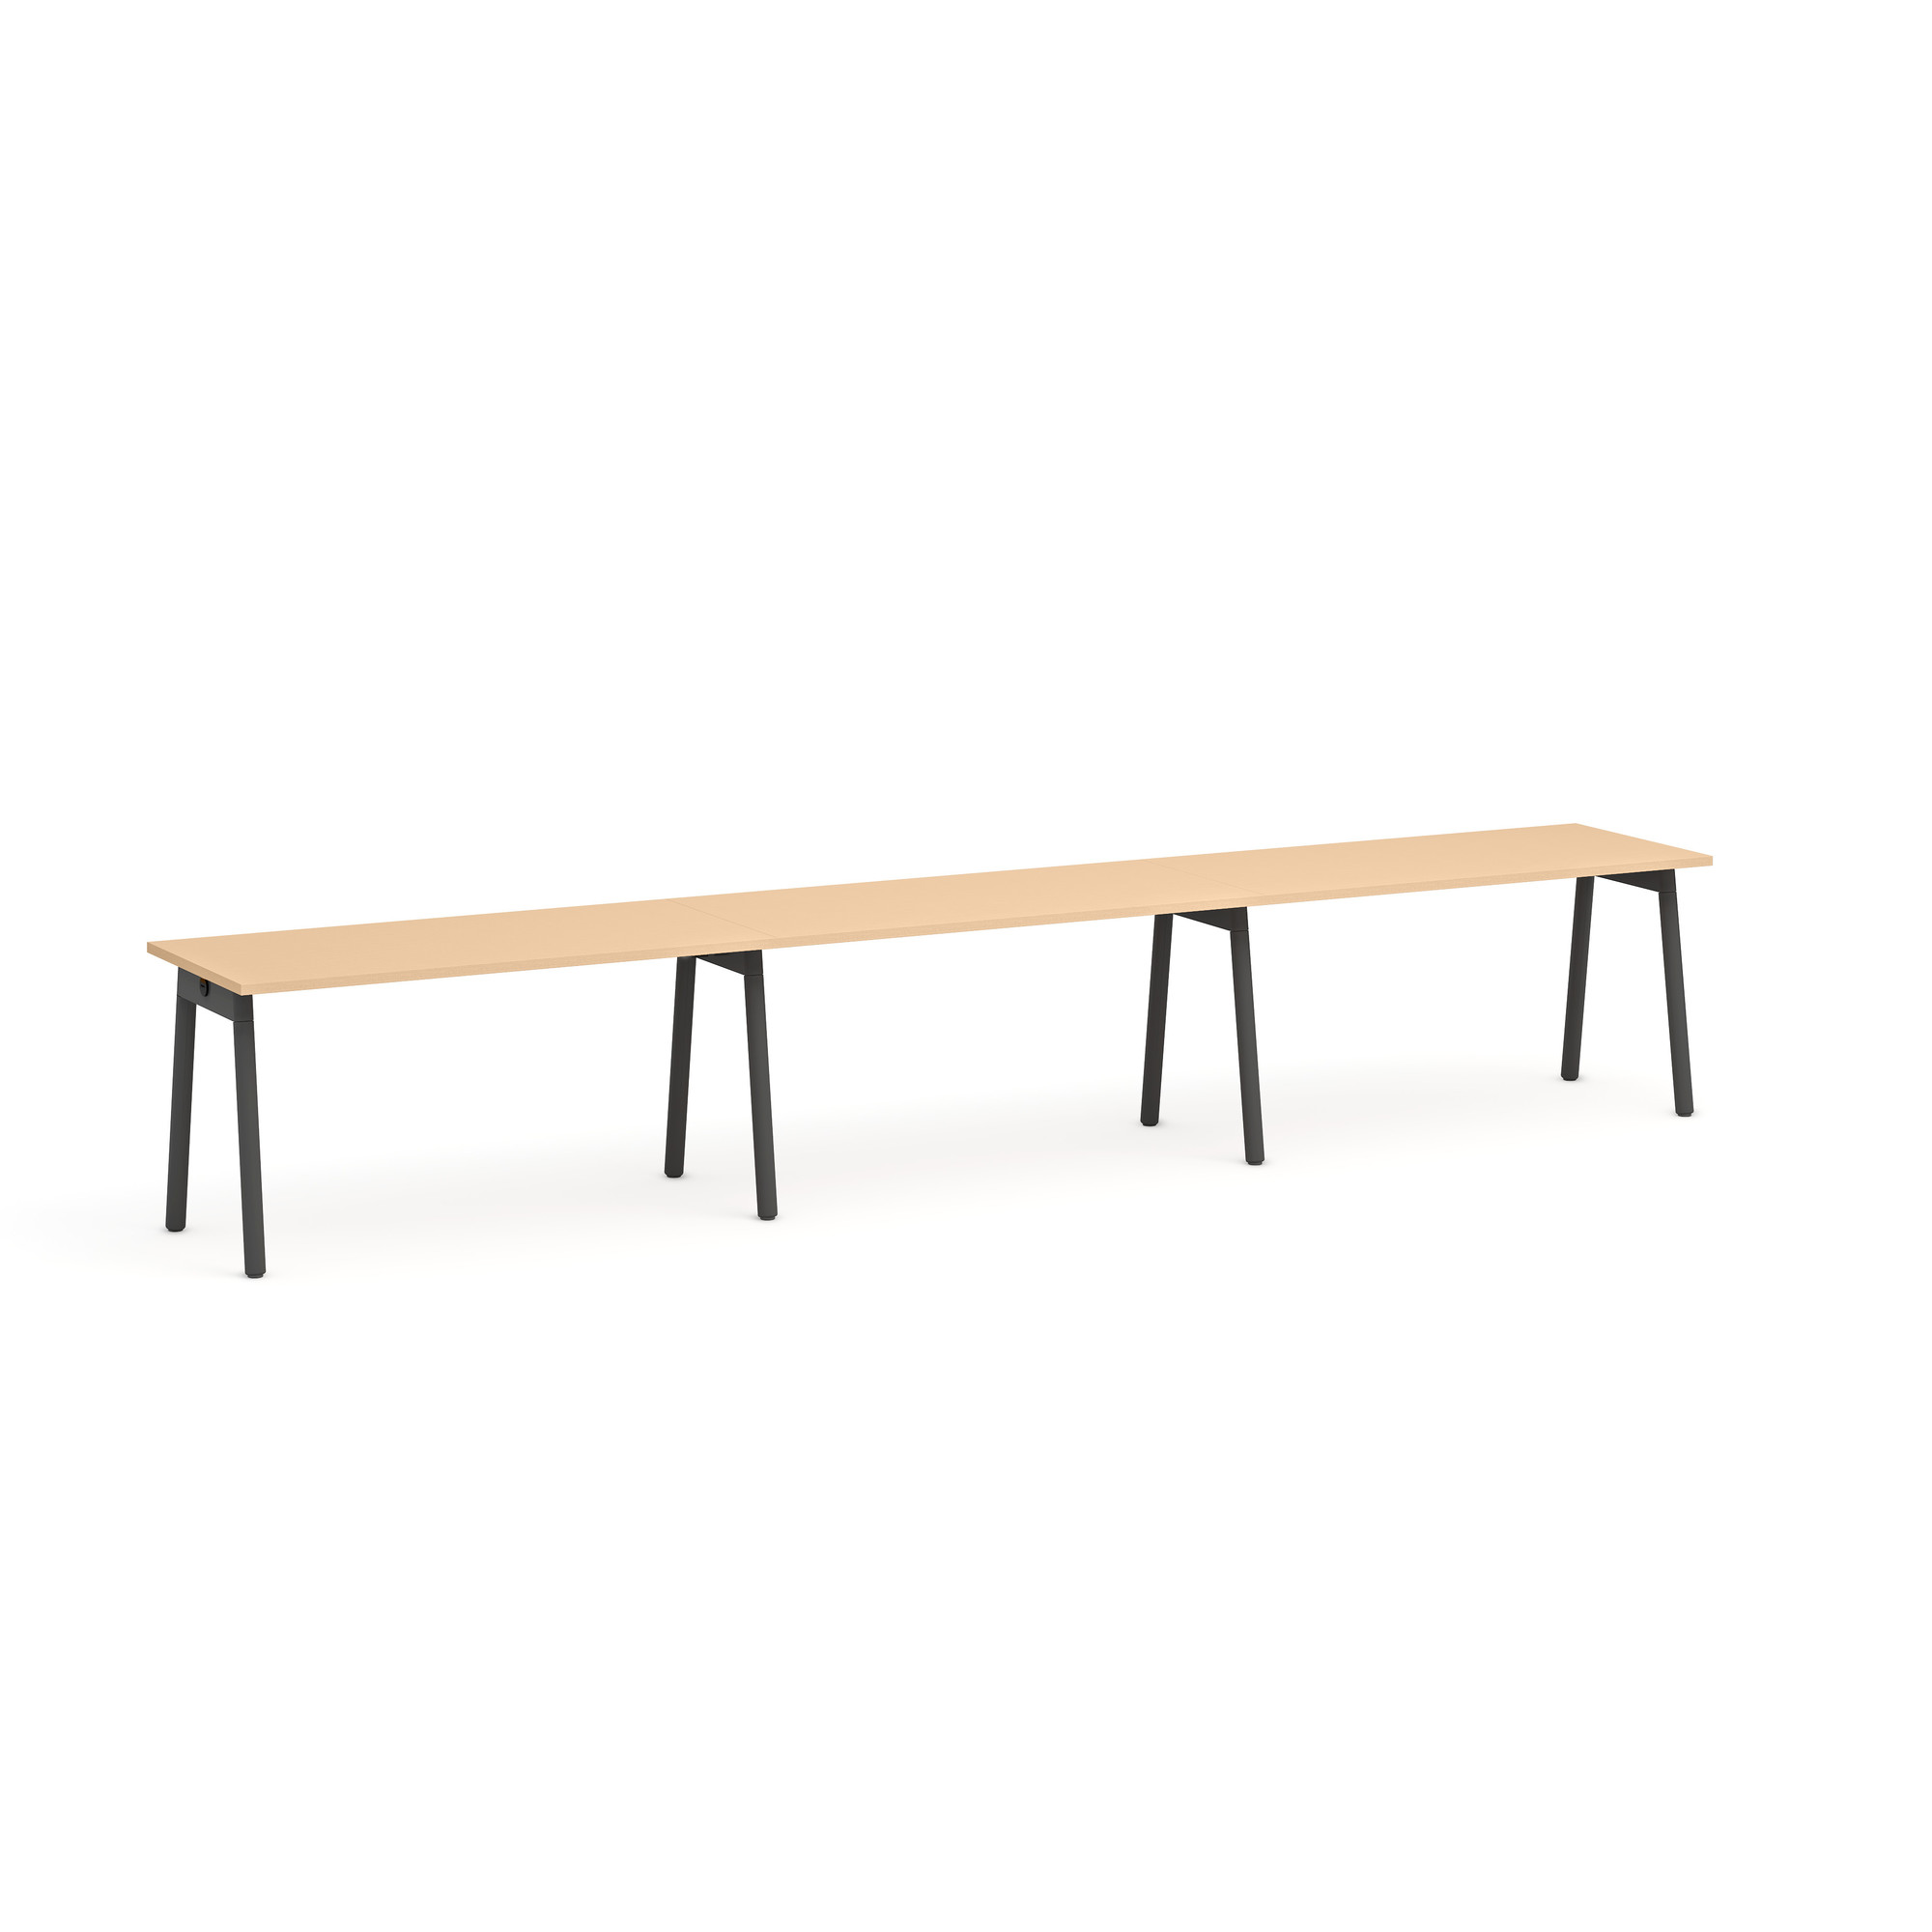 Series A Single Desk for 3, Charcoal Legs